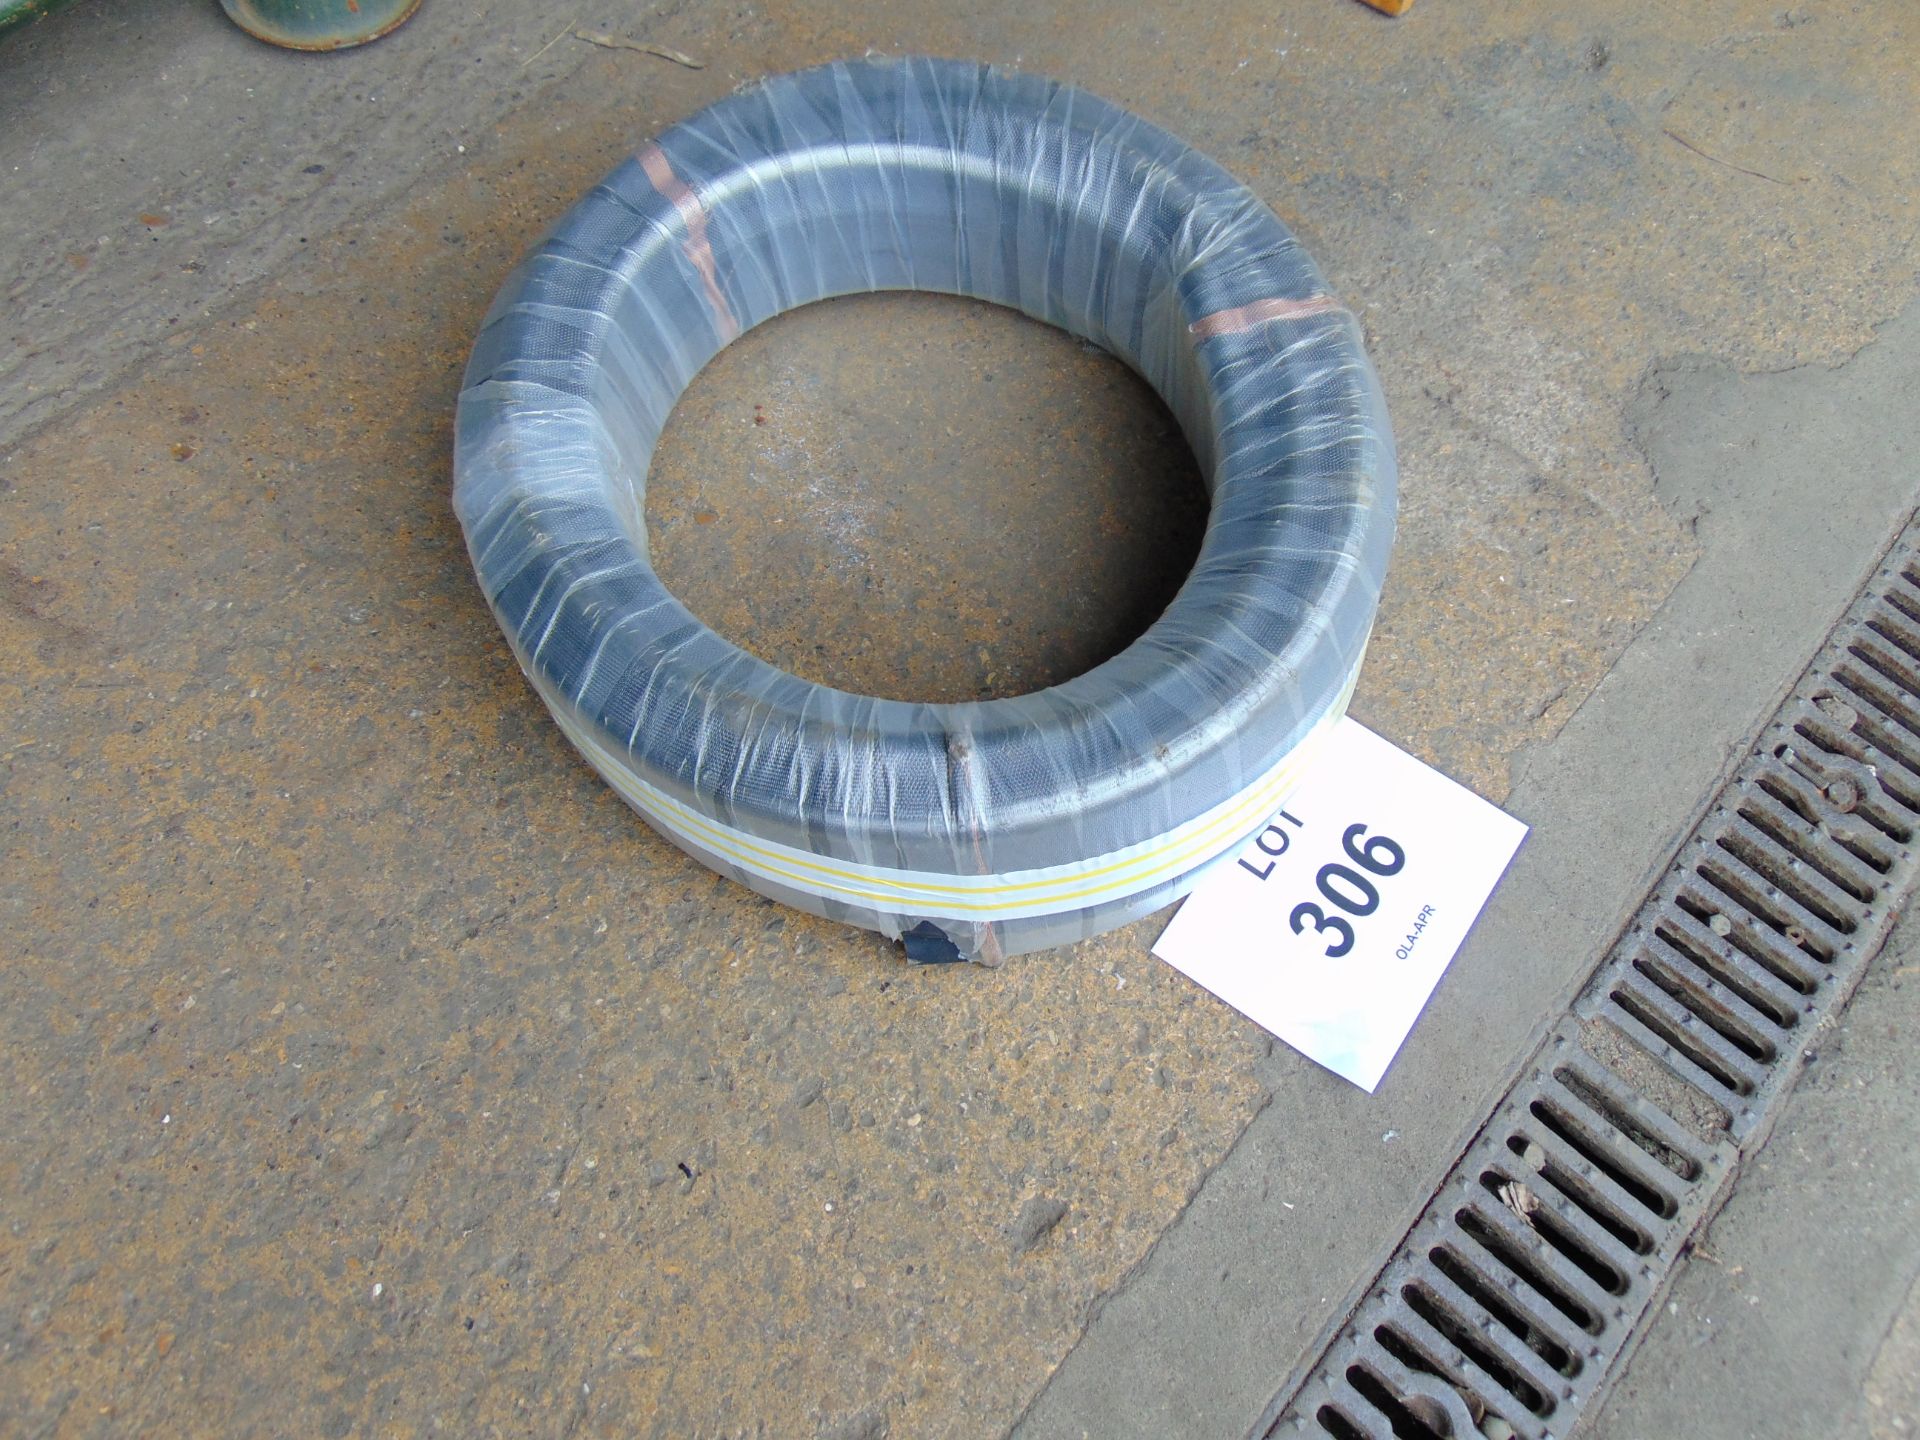 New 20m Roll of 19mm Low Pressure Double Braid Hose - Image 2 of 3